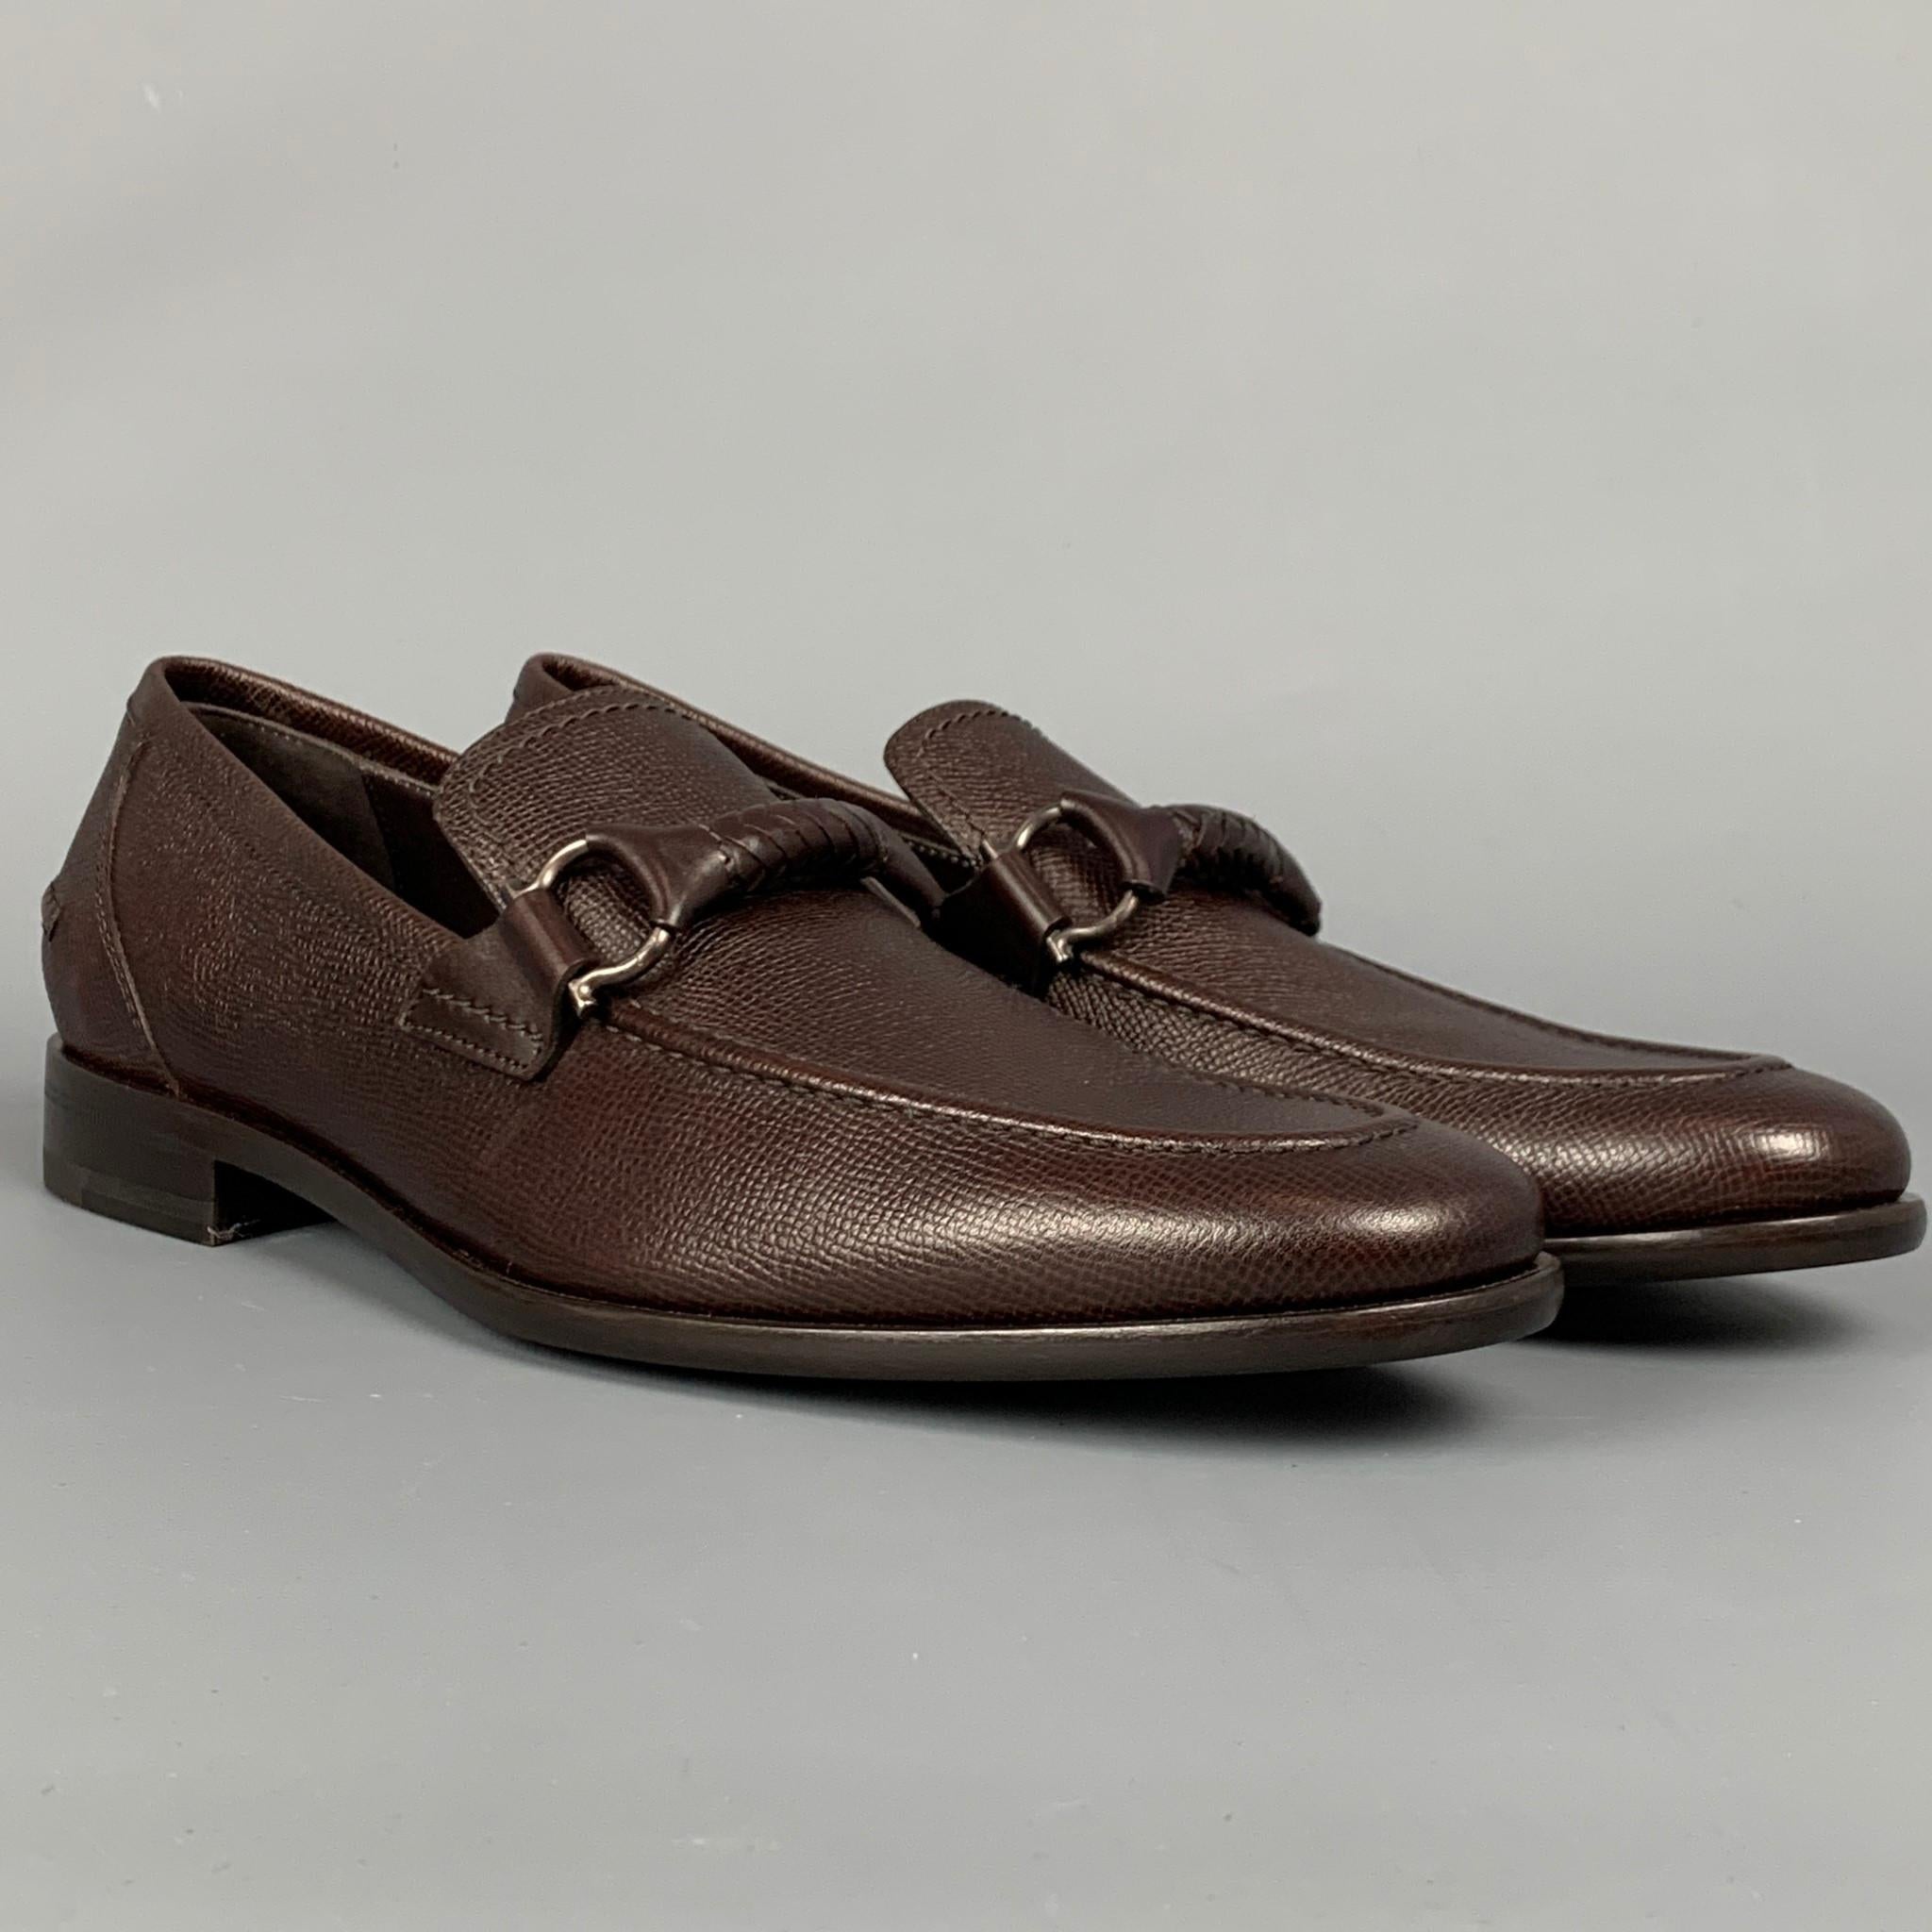 SALVATORE FERRAGAMO loafers comes in a dark brown pebble leather featuring a signature braided gancini bit strap, slip on style, and a padded leather insole. Made in Italy.

New With Box. 
Marked: 2VP 88310 8 D
Original Retail Price: